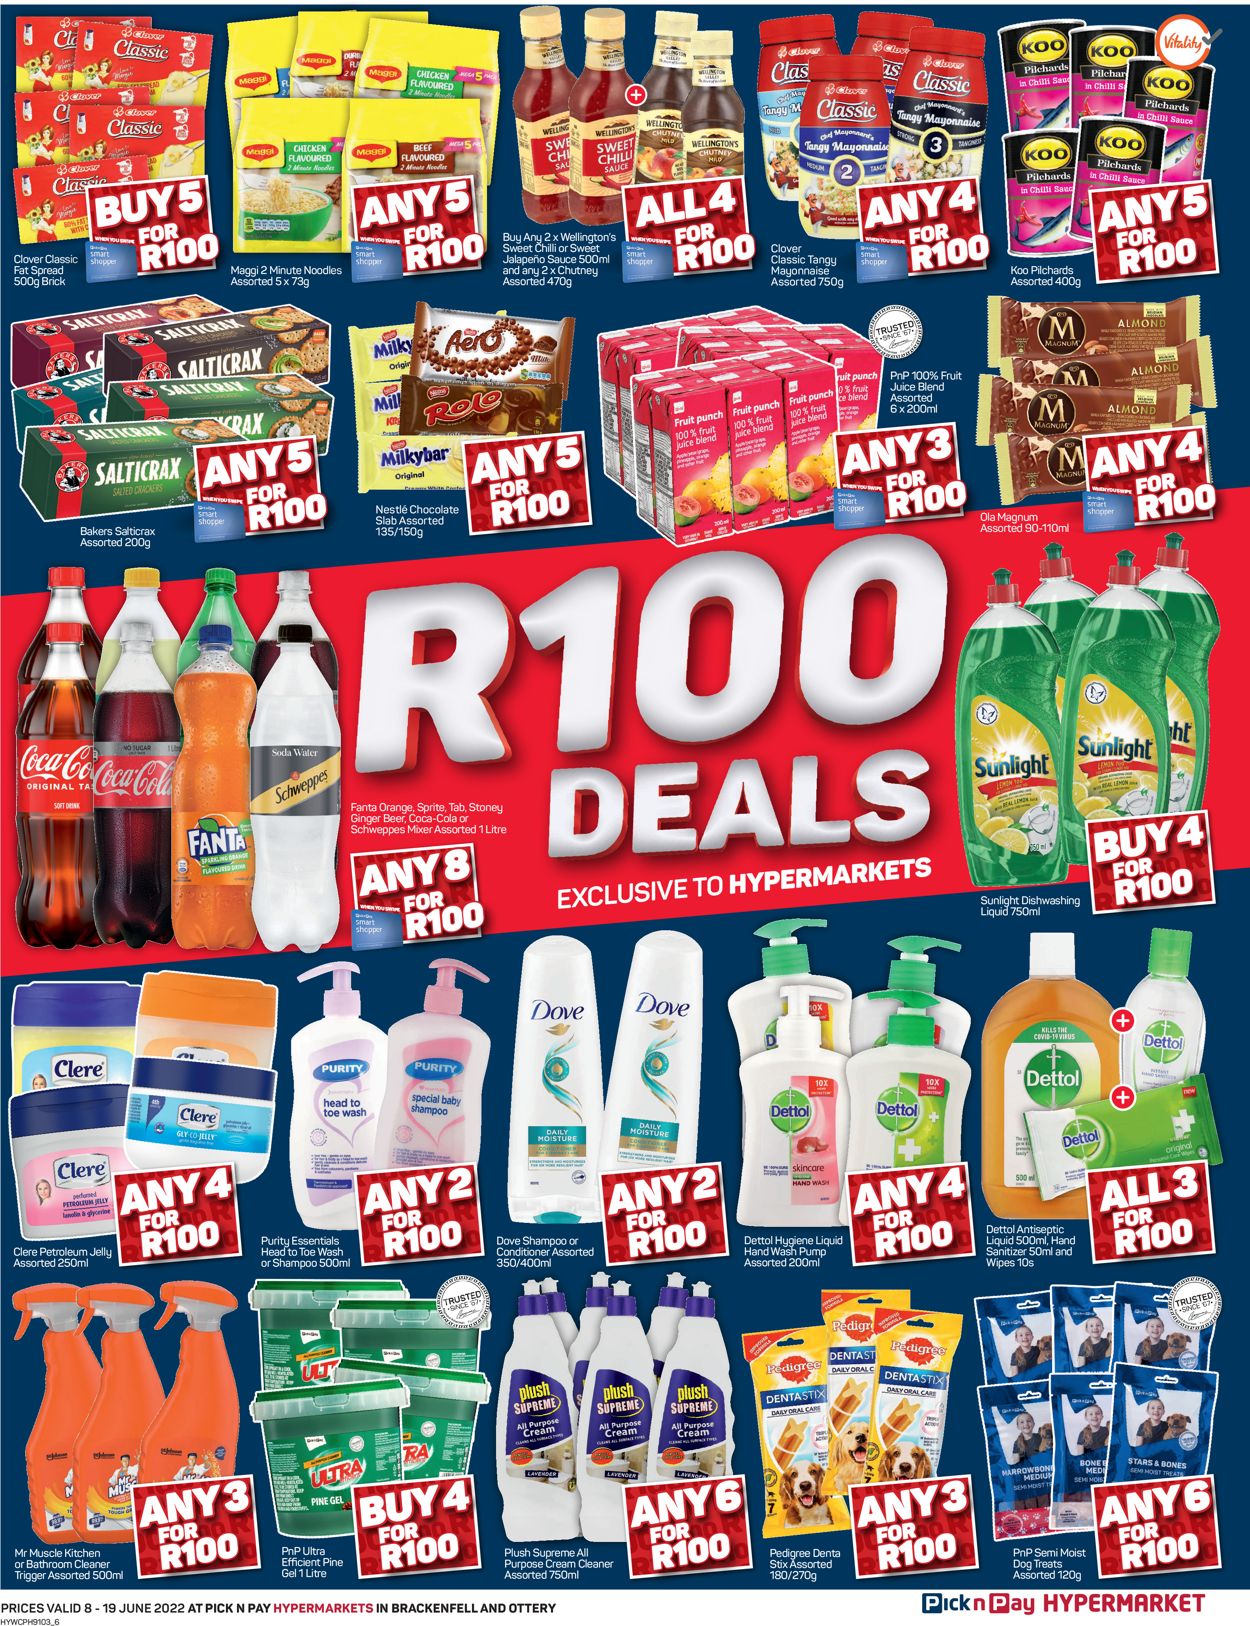 Pick n Pay Catalogue - 2022/06/08-2022/06/19 (Page 6)